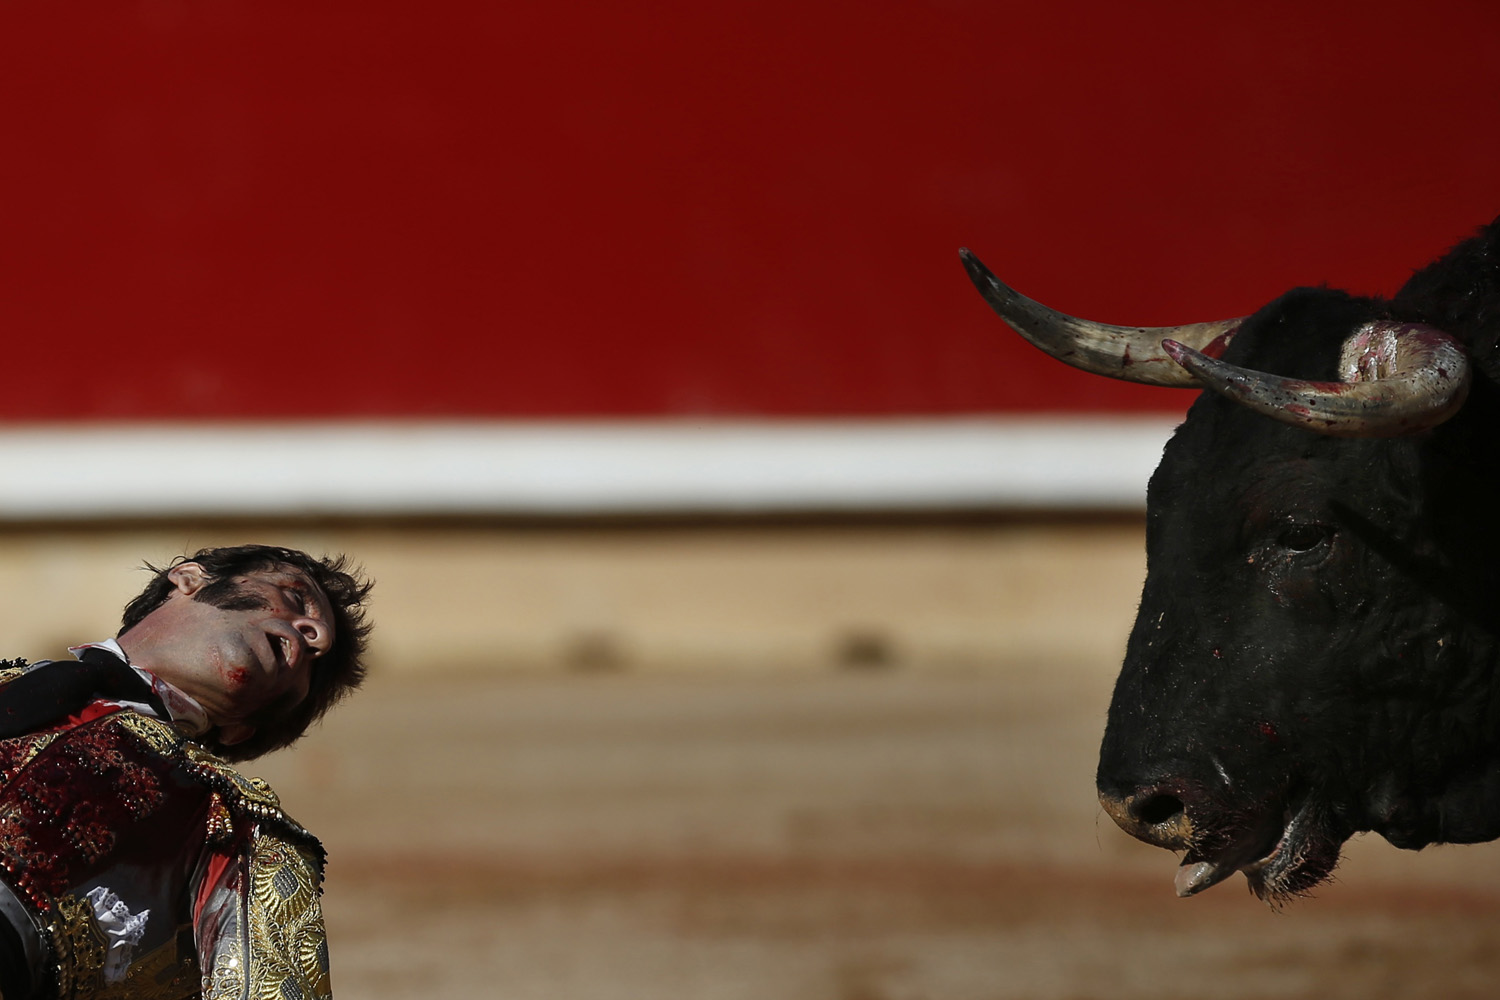 Spanish bullfighter Padilla turns his head to look at a bull as he kneels down during the seventh bullfight of the San Fermin festival in Pamplona